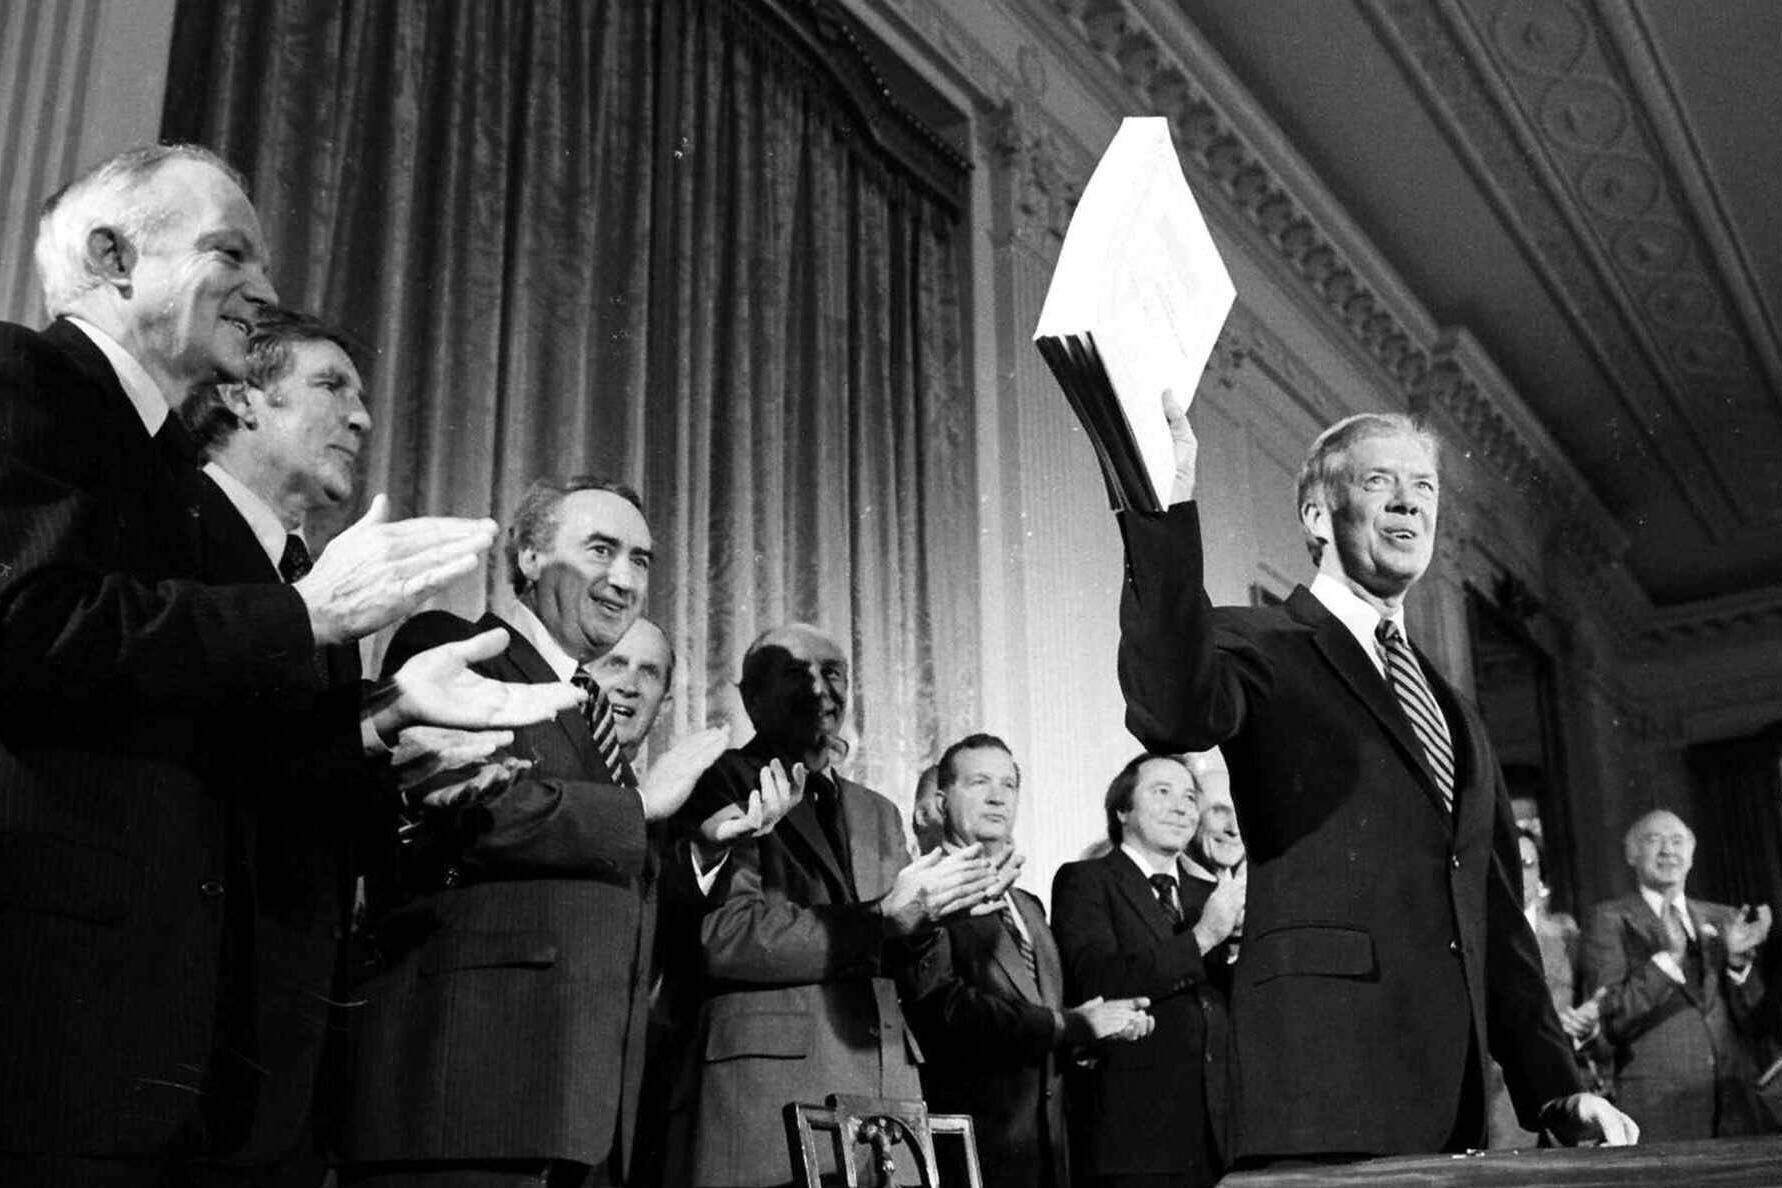 President Jimmy Carter holds up the Alaska National Interest Lands Conservation Act, which declared 104 million acres in Alaska as national parks, wildlife refuges and other conservation categories, after signing it into law at a ceremony at the White House in Washington, on Dec. 2, 1980. Carter on Monday, May 9, 2022, took the unusual step of weighing in on a court case involving his landmark conservation act and a remote refuge in Alaska. Carter filed a amicus brief in the longstanding legal dispute over efforts to build a road through the refuge, worried that the latest decision to allow a gravel road to provide residents access to an all-weather airport for medical evacuations goes beyond this one case and could allow millions of acres (hectares) to be opened for “adverse development.” (AP Photo, File)